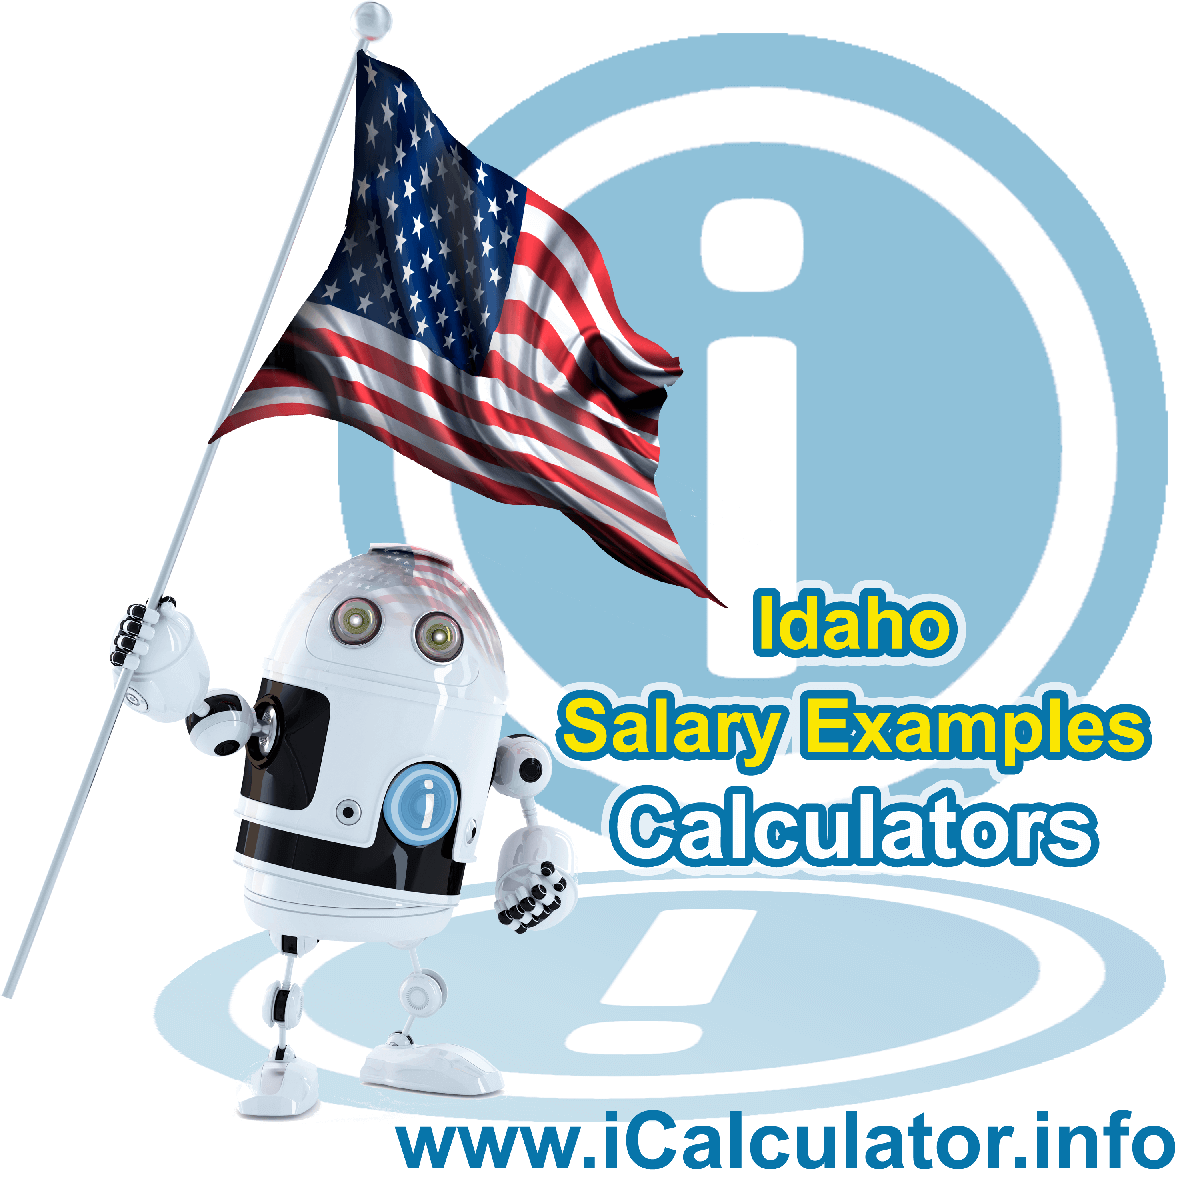 Idaho Salary Example for $120,000.00 in 2022 | iCalculator™ | $120,000.00 salary example for employee and employer paying Idaho State tincome taxes. Detailed salary after tax calculation including Idaho State Tax, Federal State Tax, Medicare Deductions, Social Security, Capital Gains and other income tax and salary deductions complete with supporting Idaho state tax tables 